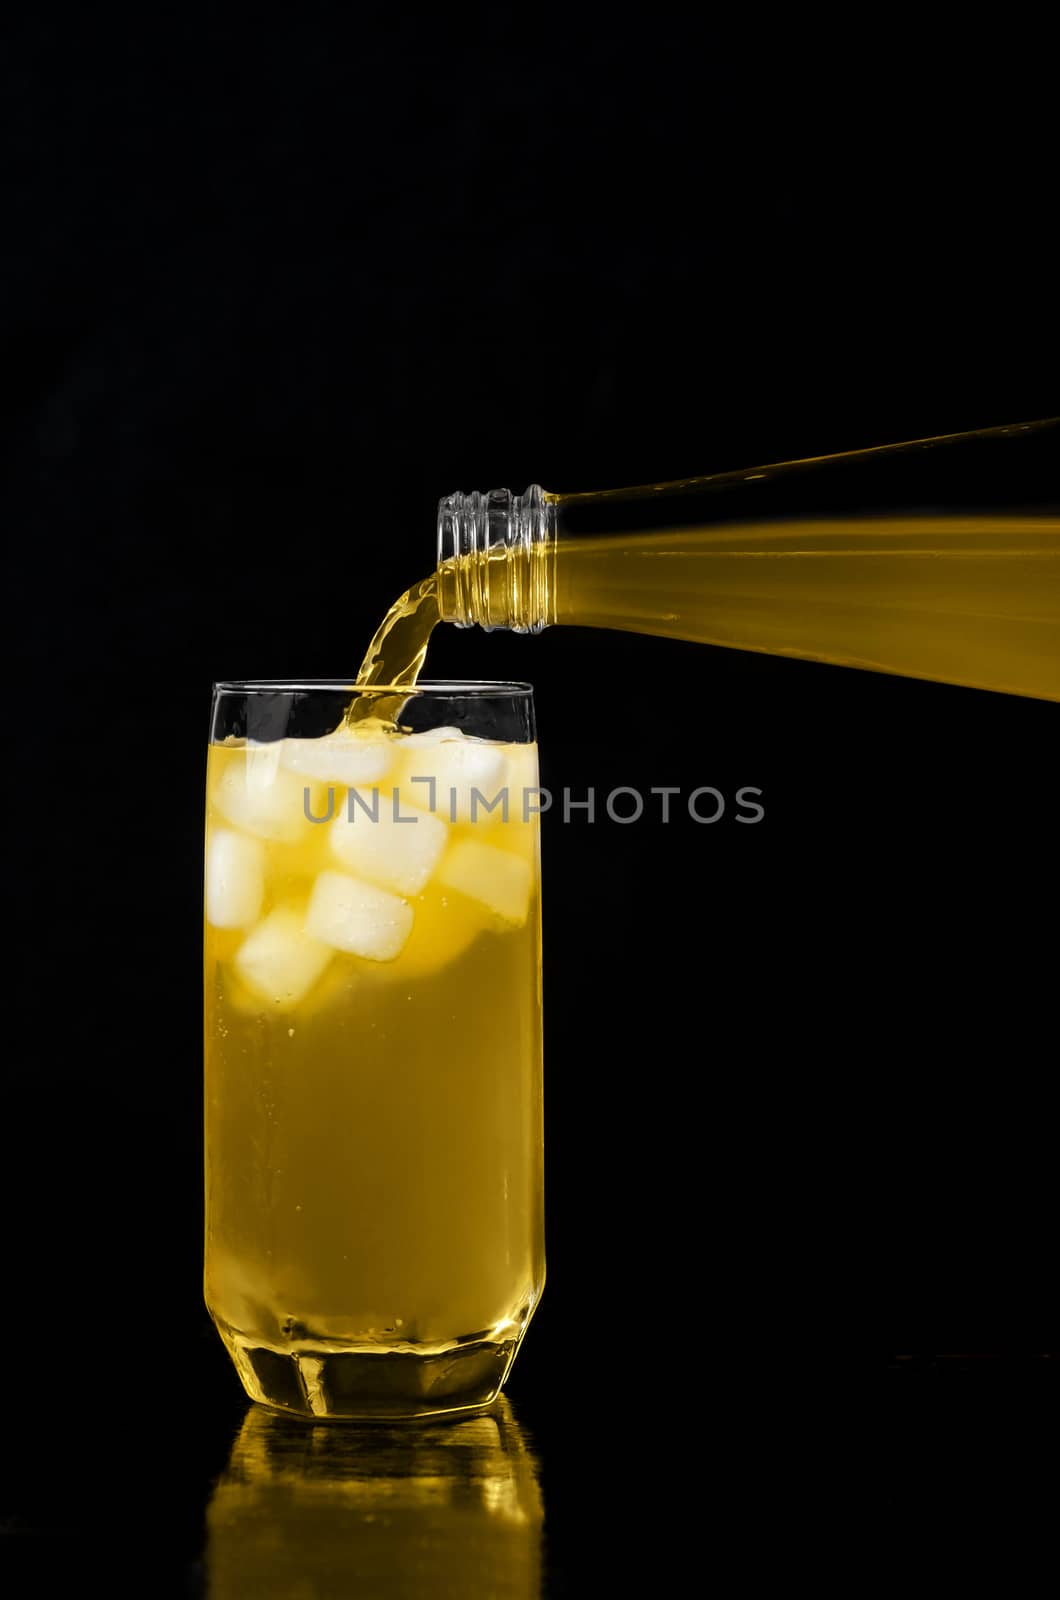 Lemonade pouring from bottle into glass with ice. Black background.